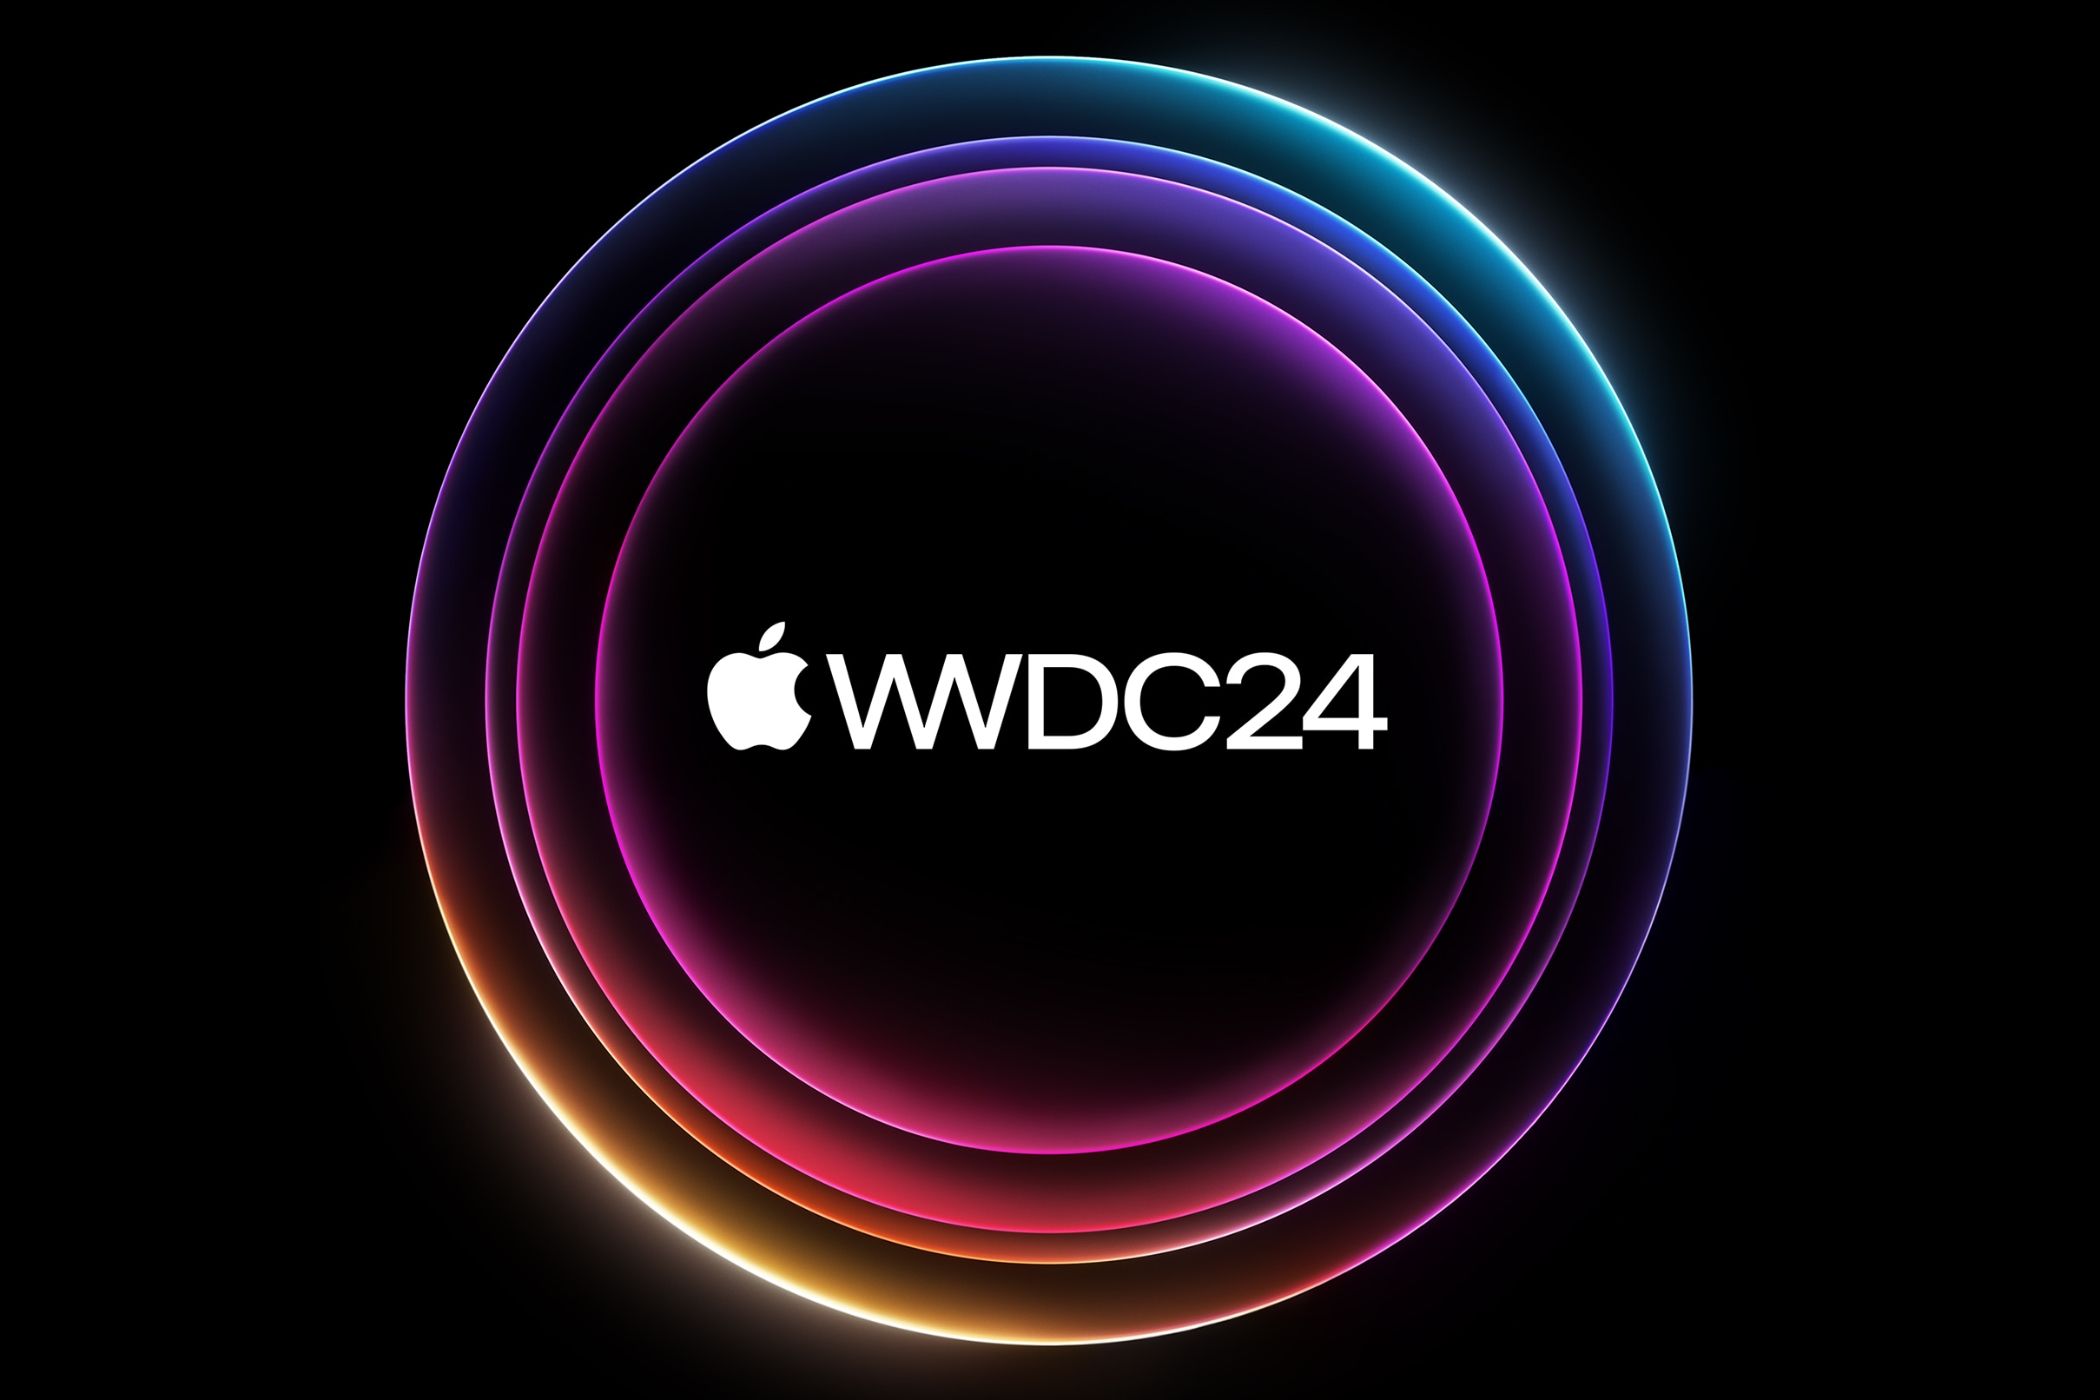 Colorful outline of the Apple Park headquarters with the Apple WWDC 2024 logo.